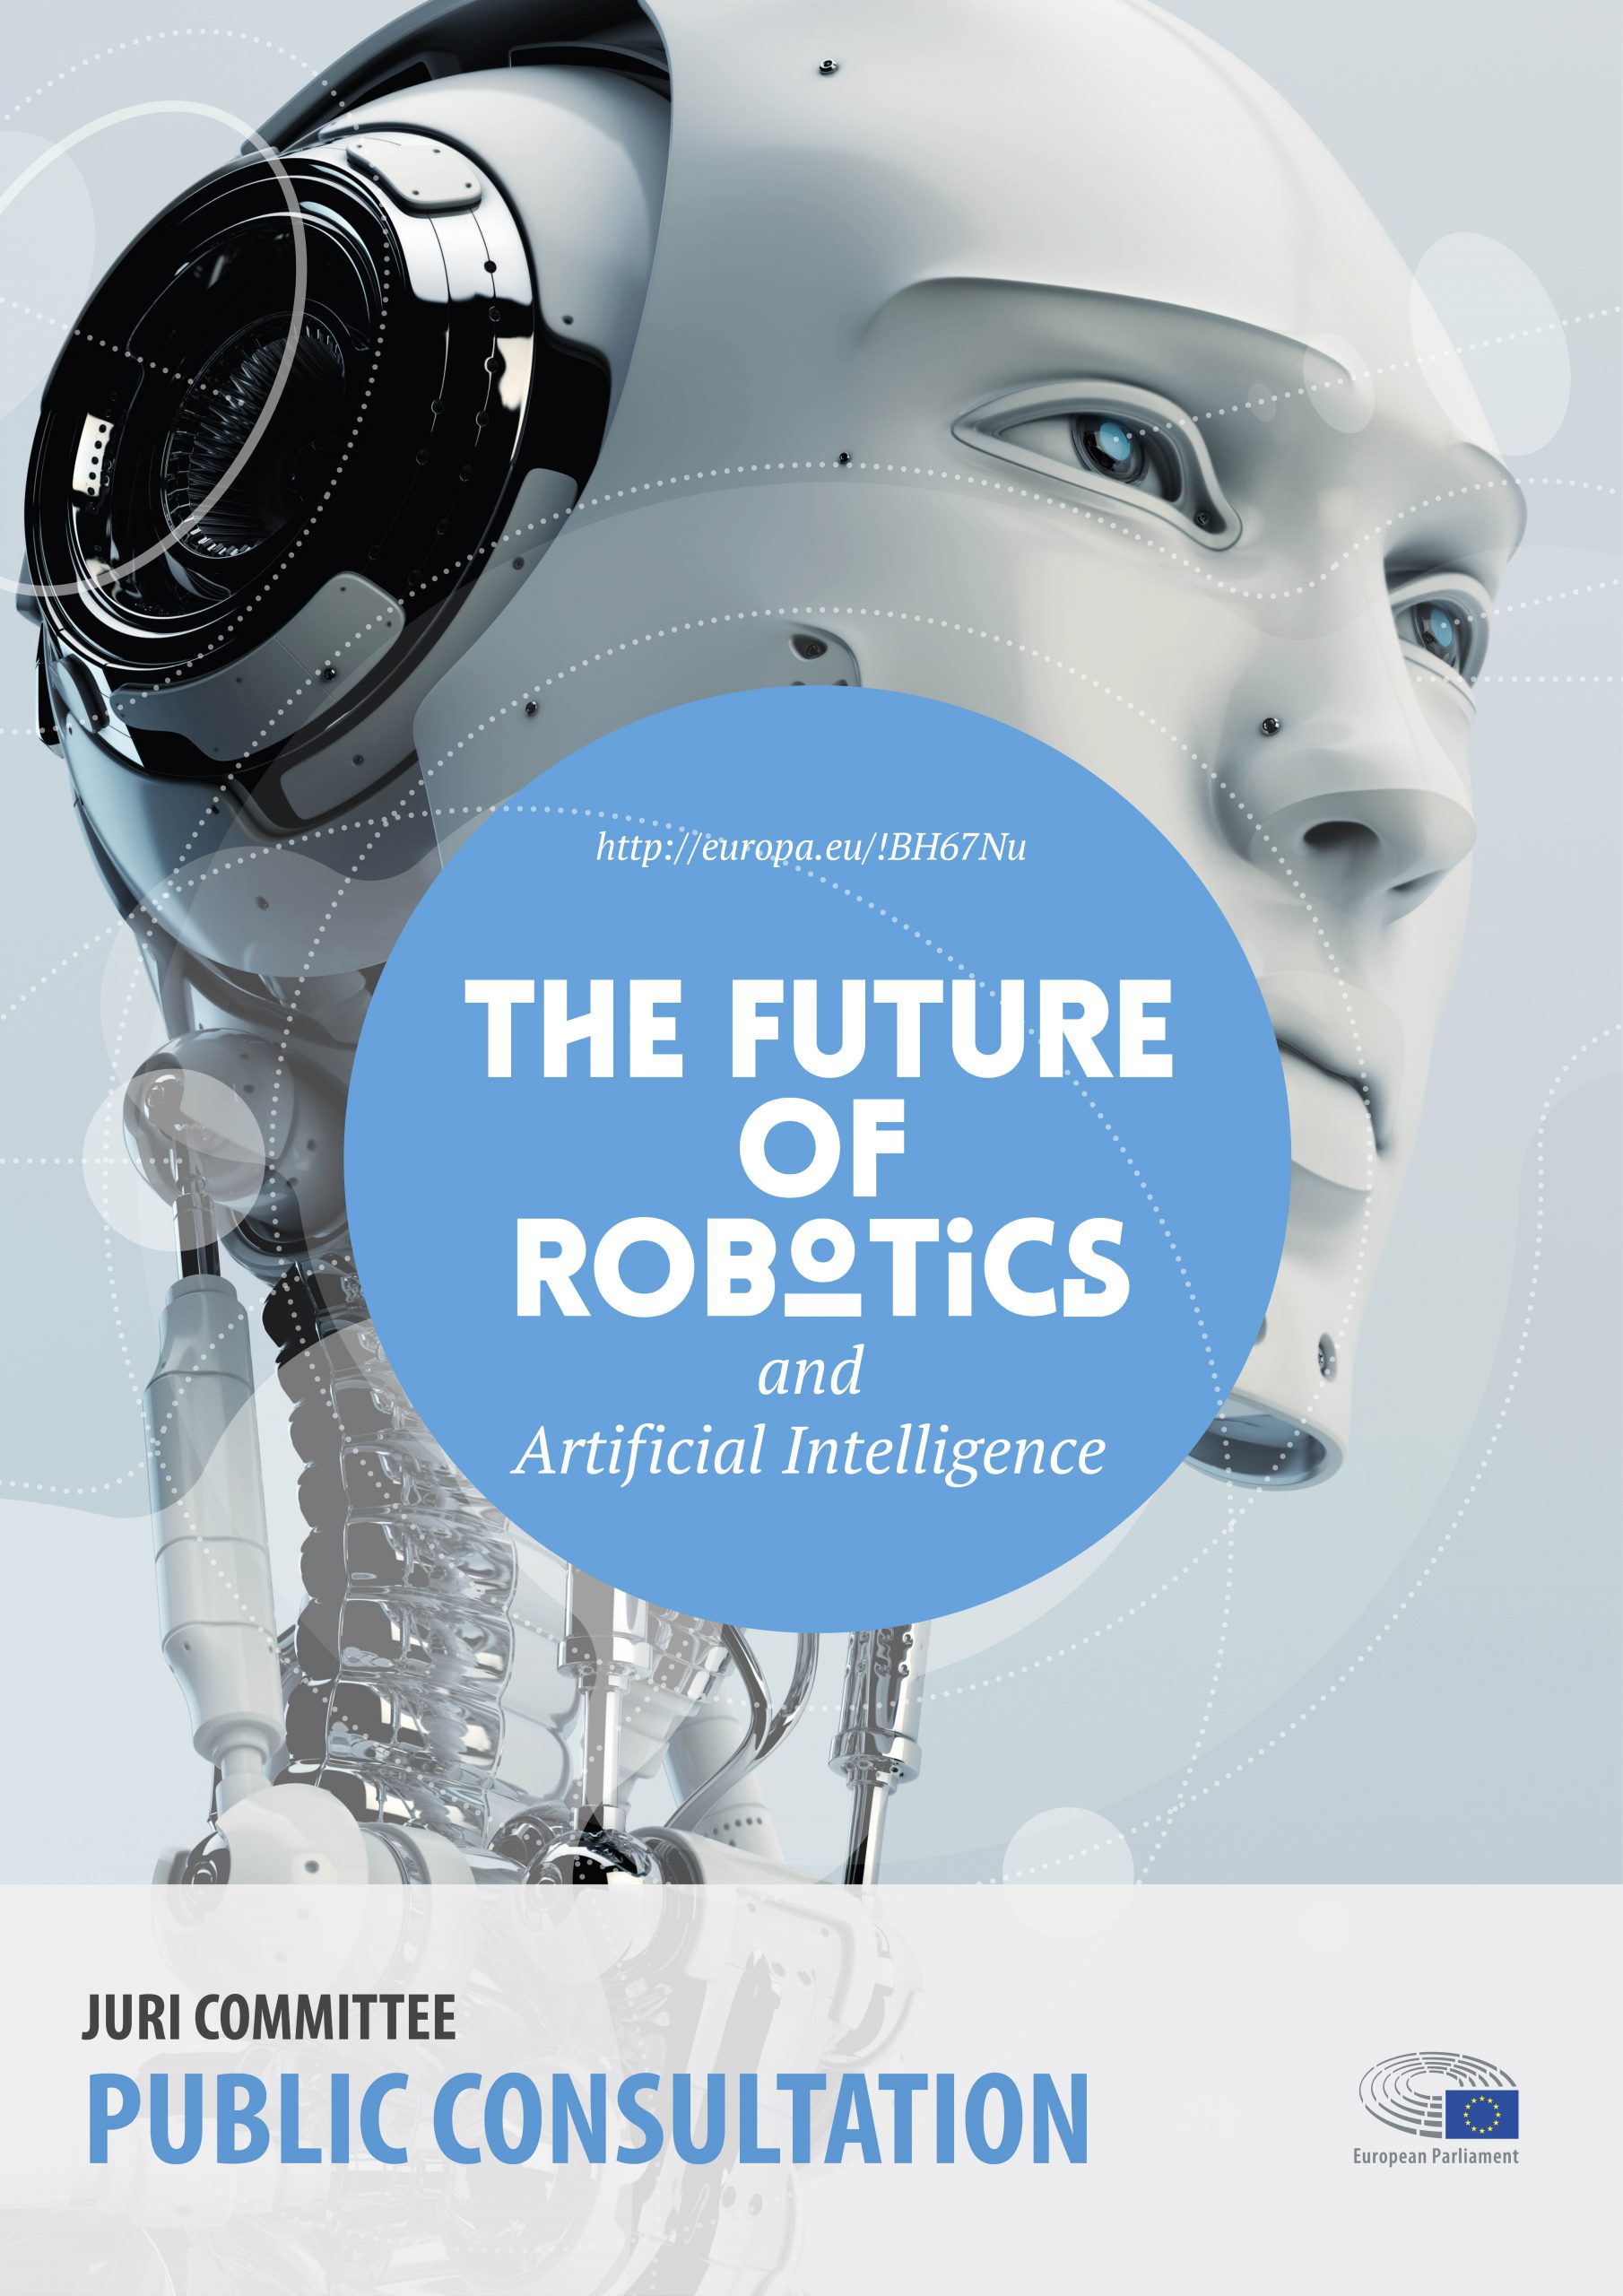 Have your say on Robotics and Artificial Intelligence!